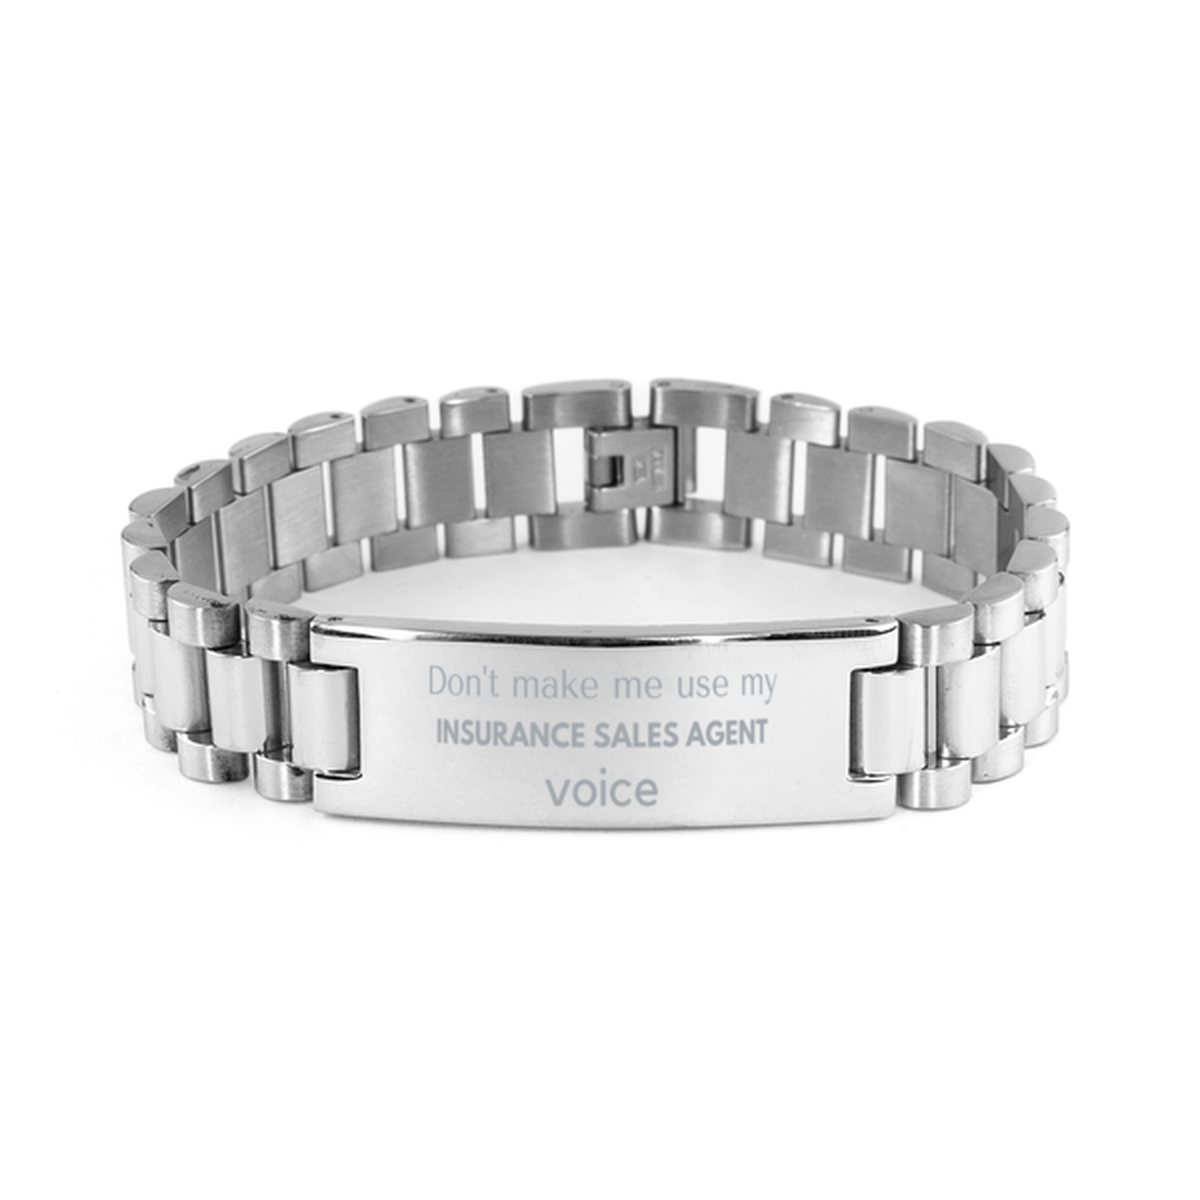 Don't make me use my Insurance Sales Agent voice, Sarcasm Insurance Sales Agent Gifts, Christmas Insurance Sales Agent Ladder Stainless Steel Bracelet Birthday Unique Gifts For Insurance Sales Agent Coworkers, Men, Women, Colleague, Friends